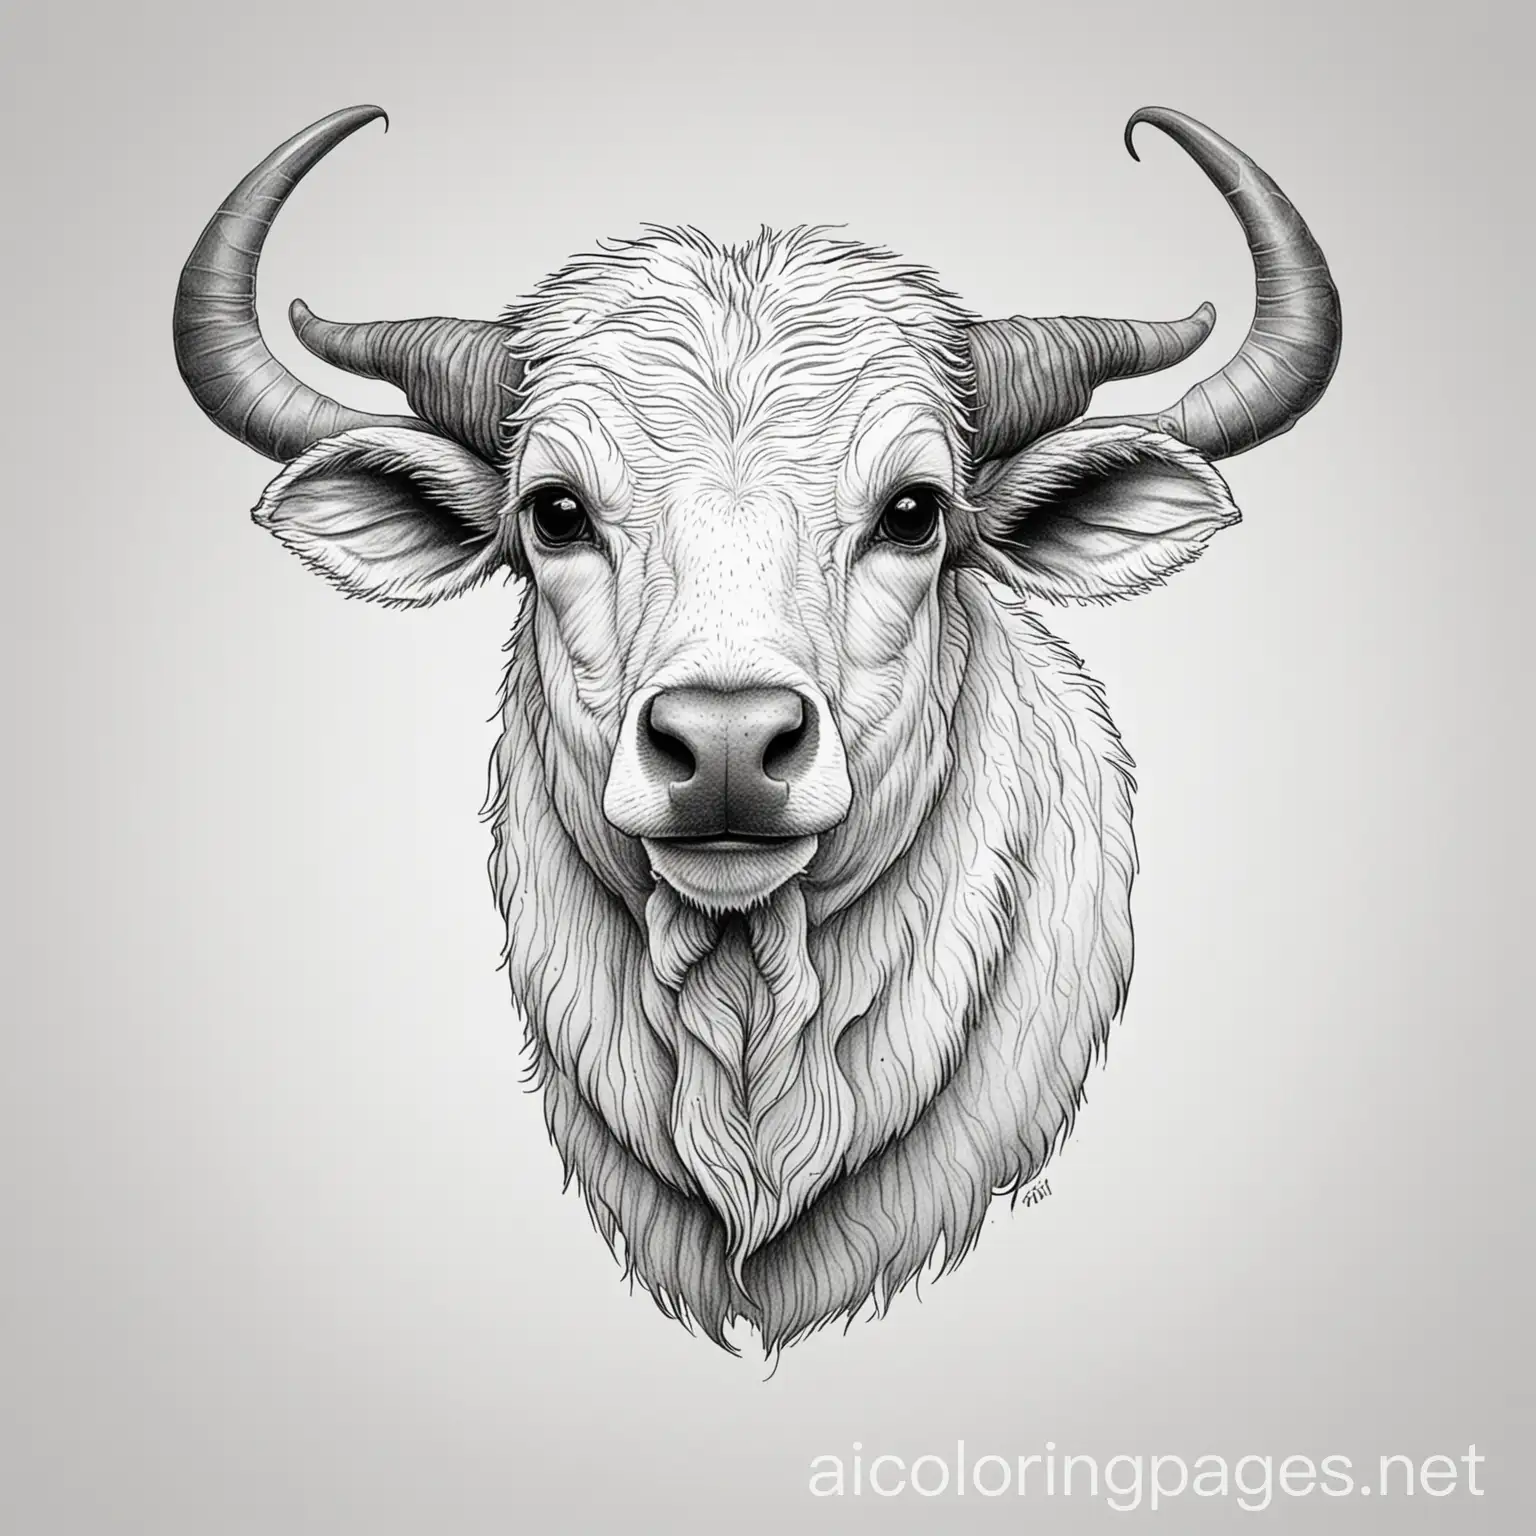 Philippine tamaraw, Coloring Page, black and white, line art, white background, Simplicity, Ample White Space. The background of the coloring page is plain white to make it easy for young children to color within the lines. The outlines of all the subjects are easy to distinguish, making it simple for kids to color without too much difficulty